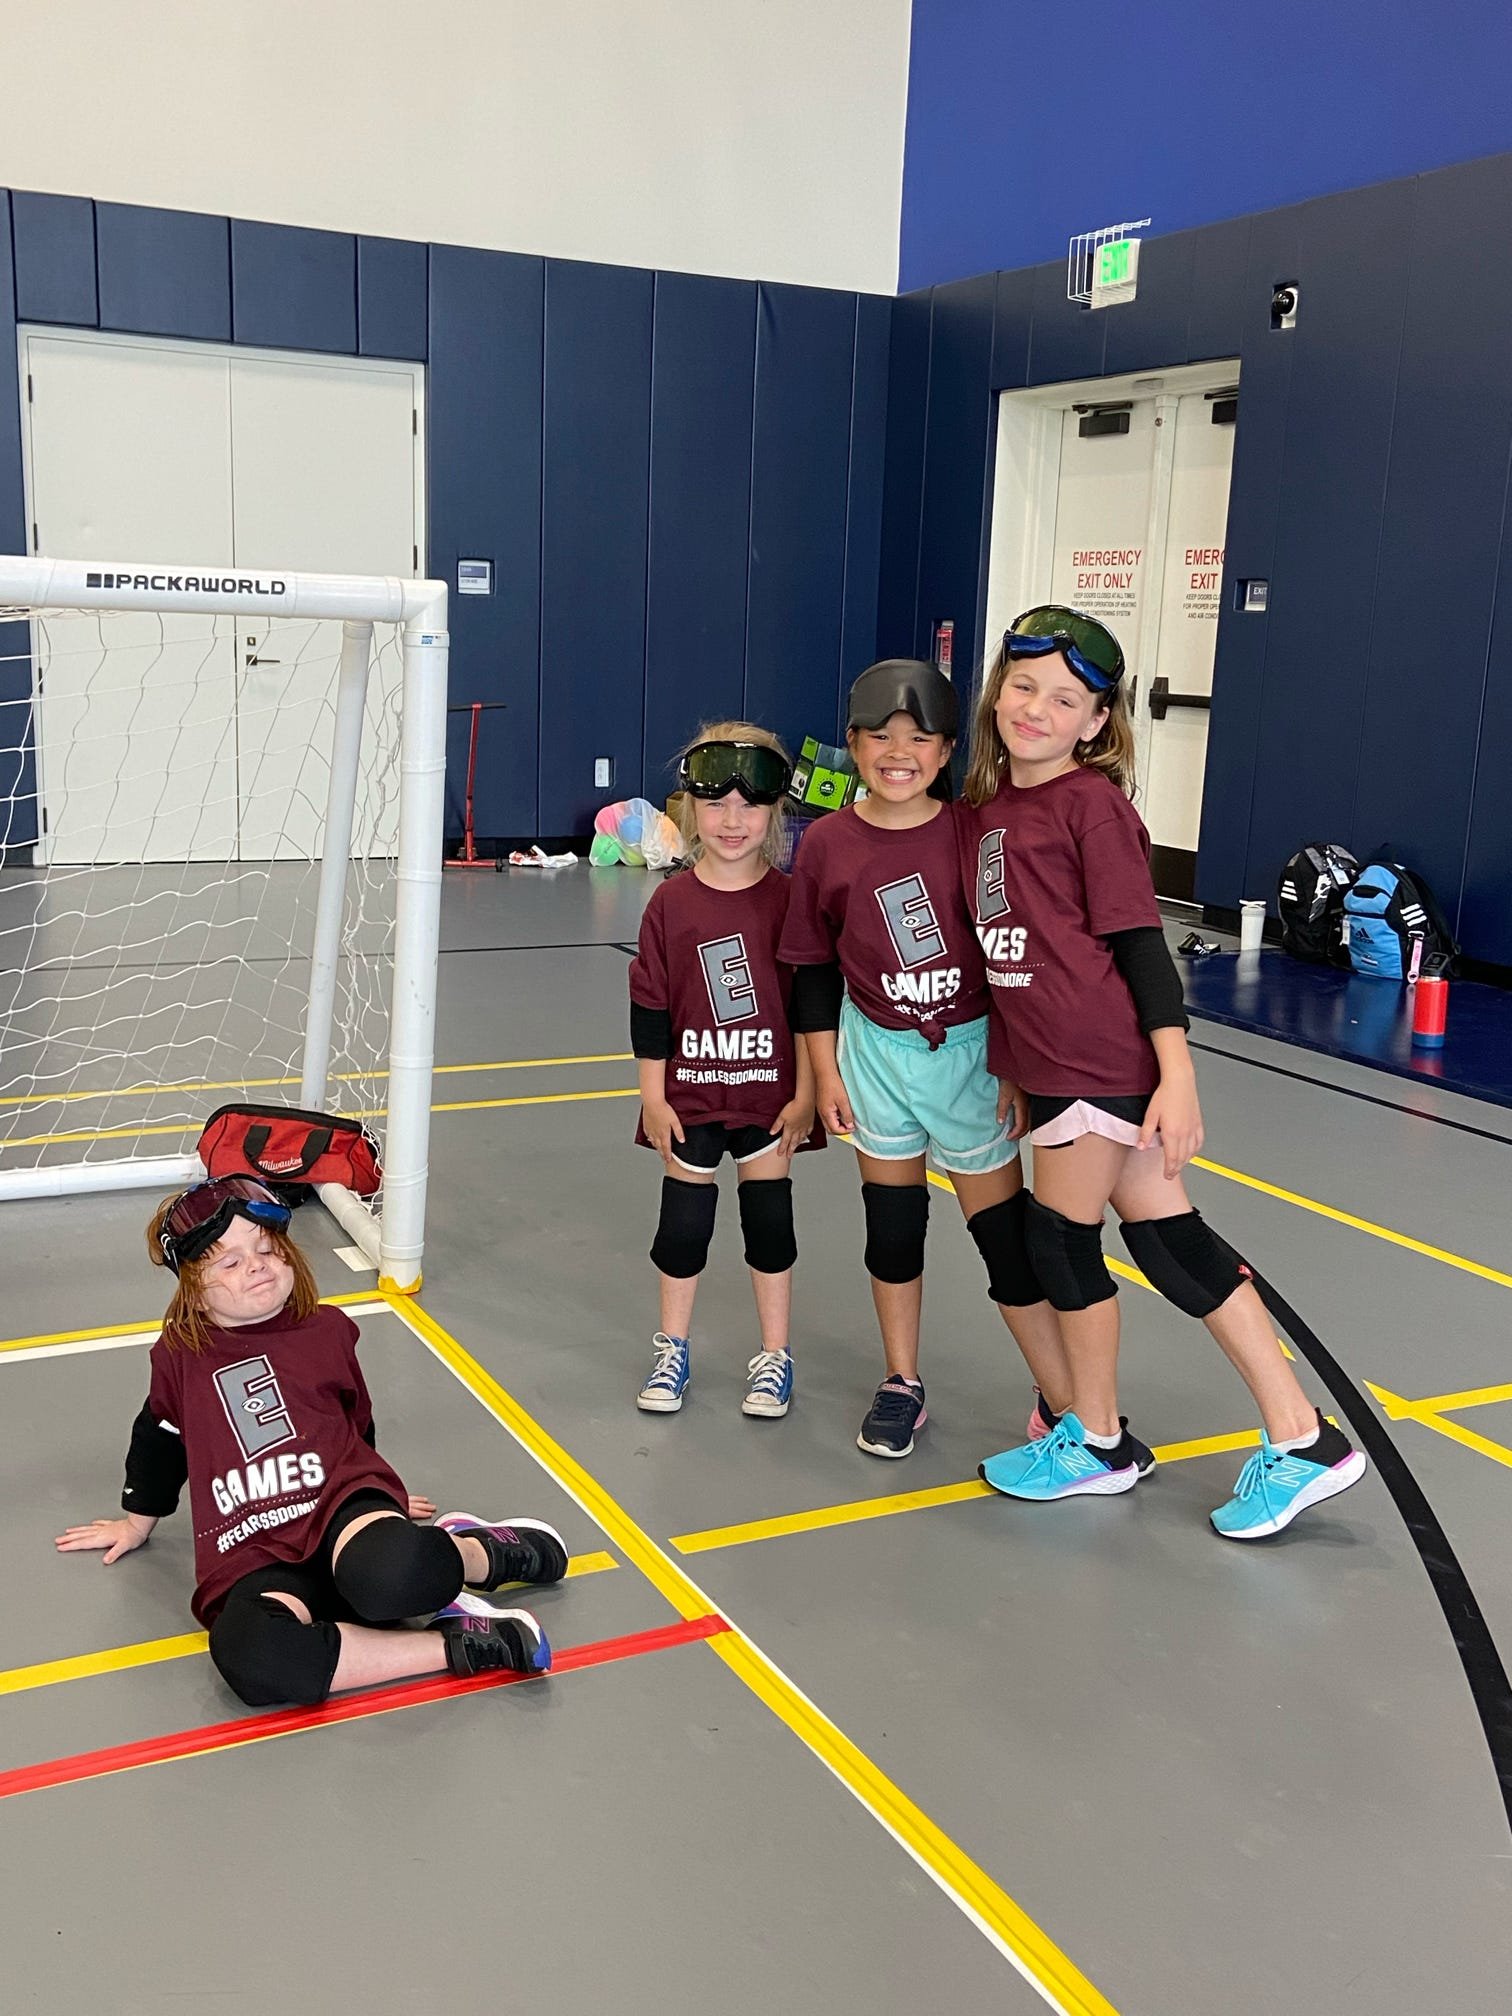  4 of our young athletes getting ready to play goalball 